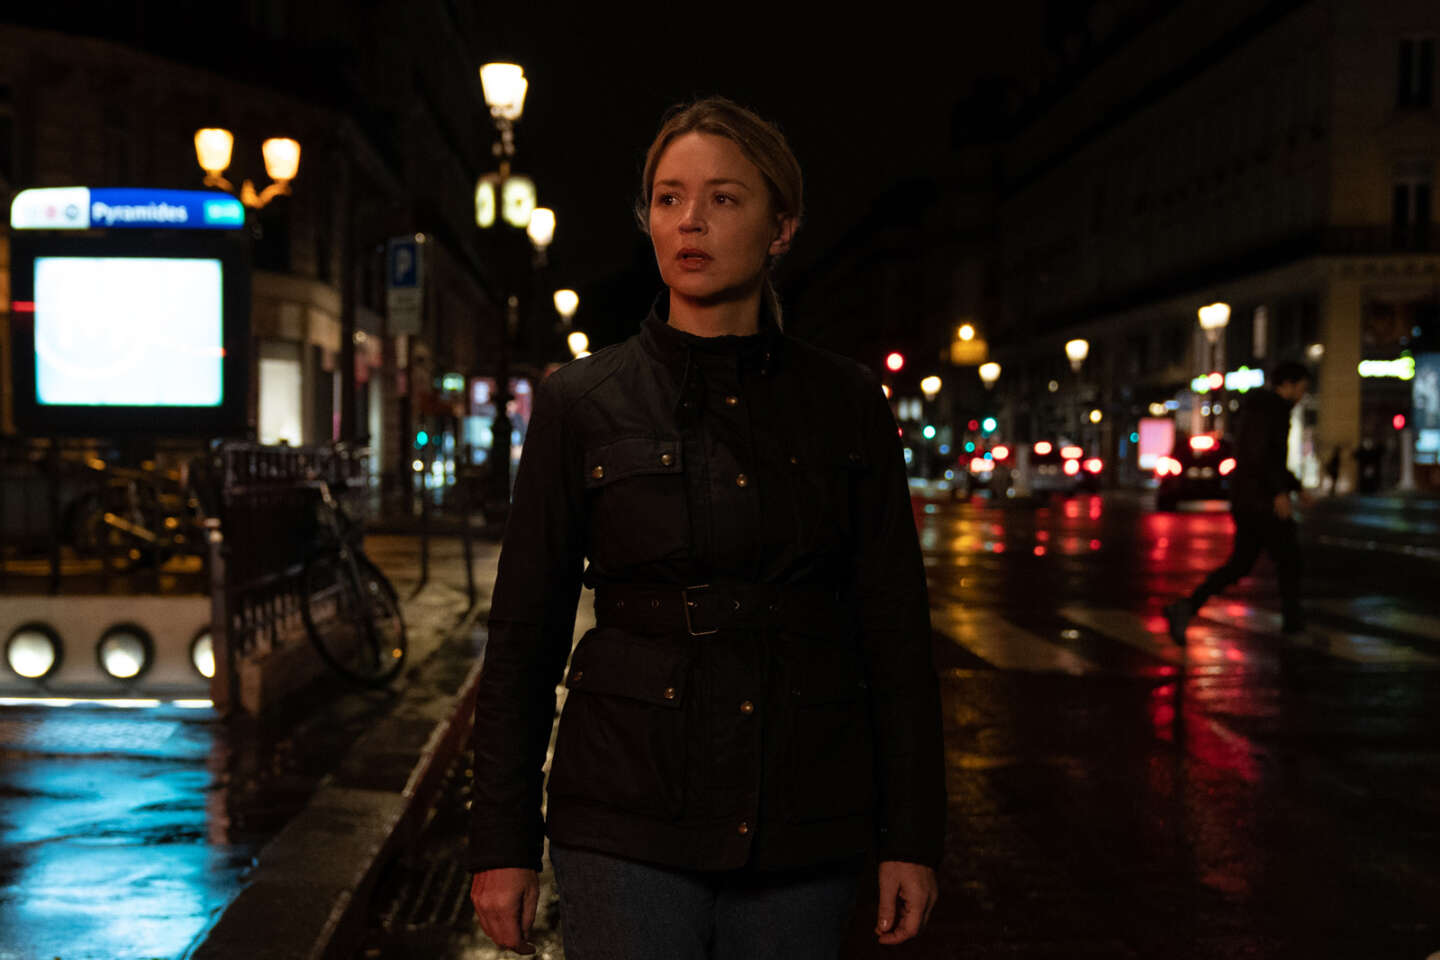 Virginie Efira as a victim of an attack, who relearns to live in the capital